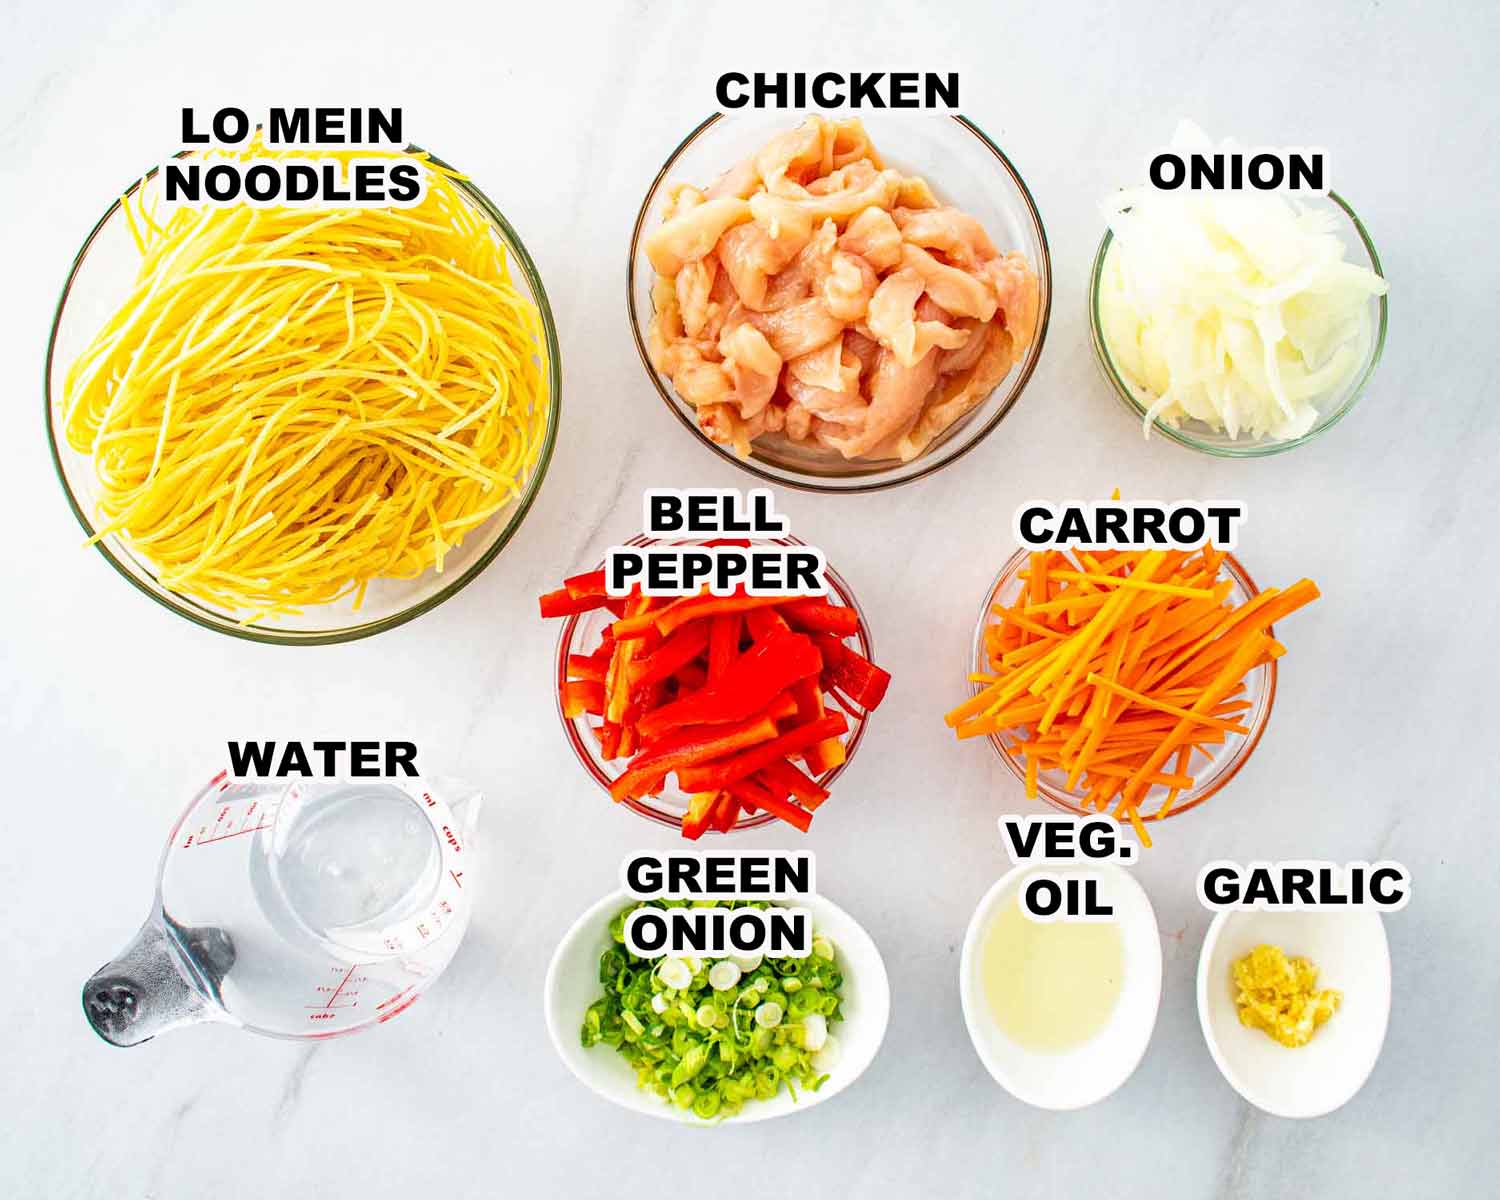 ingredients needed to make lo mein.